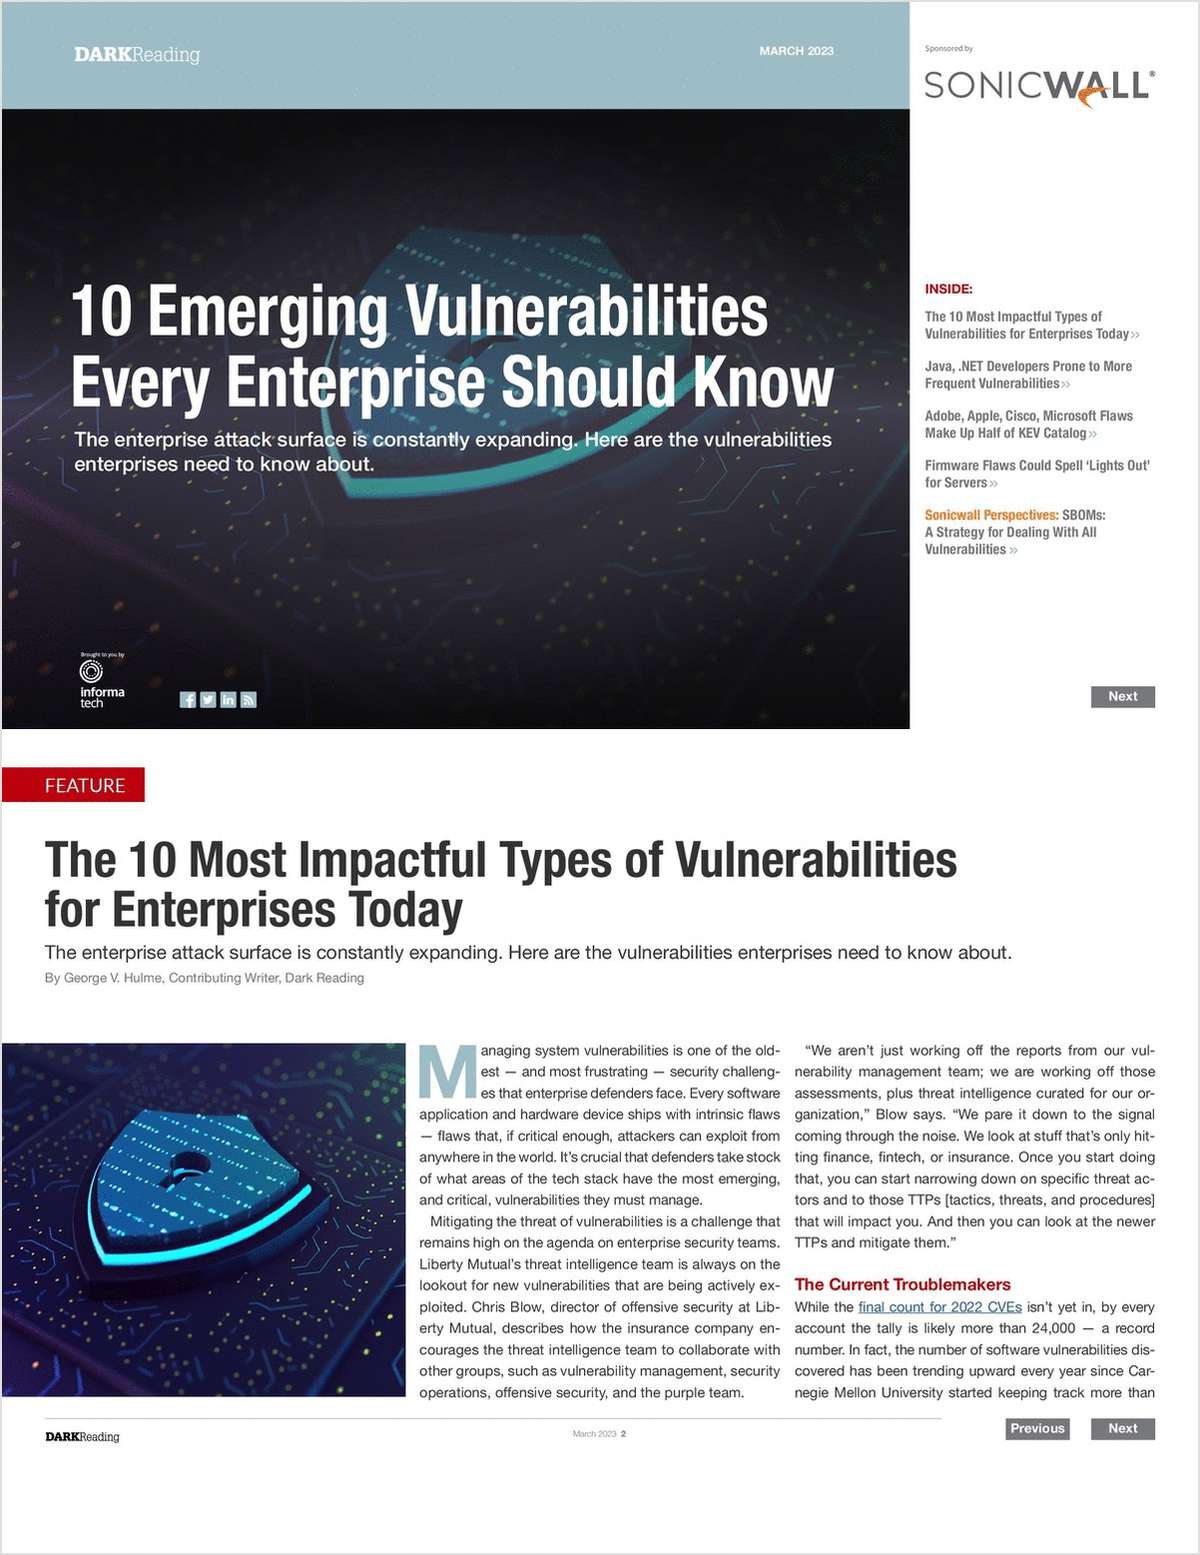 The 10 Most Impactful Types of Vulnerabilities  for Enterprises Today